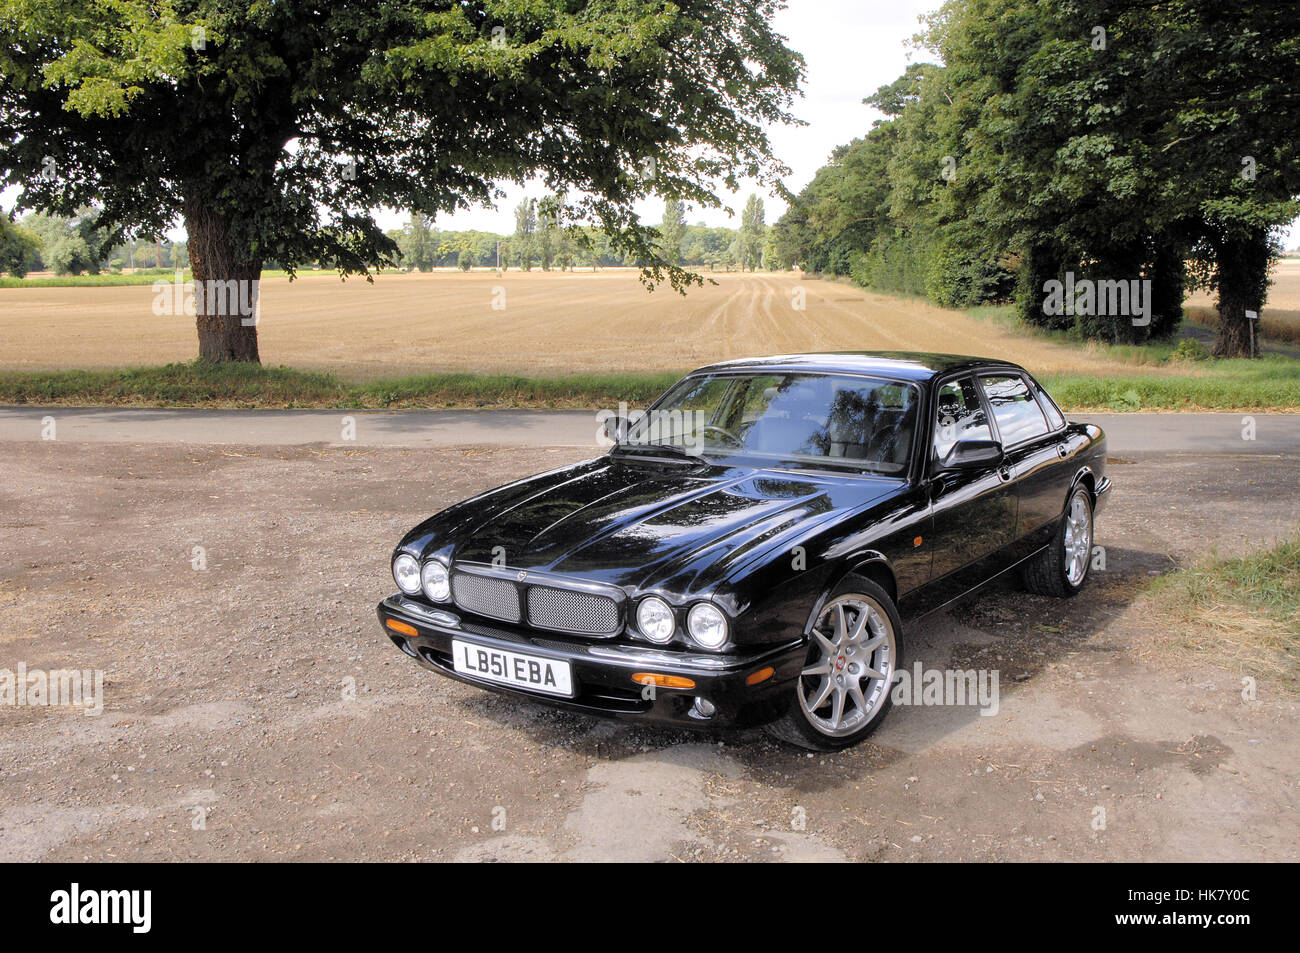 Jaguar XJR100 black car parked with trees Stock Photo